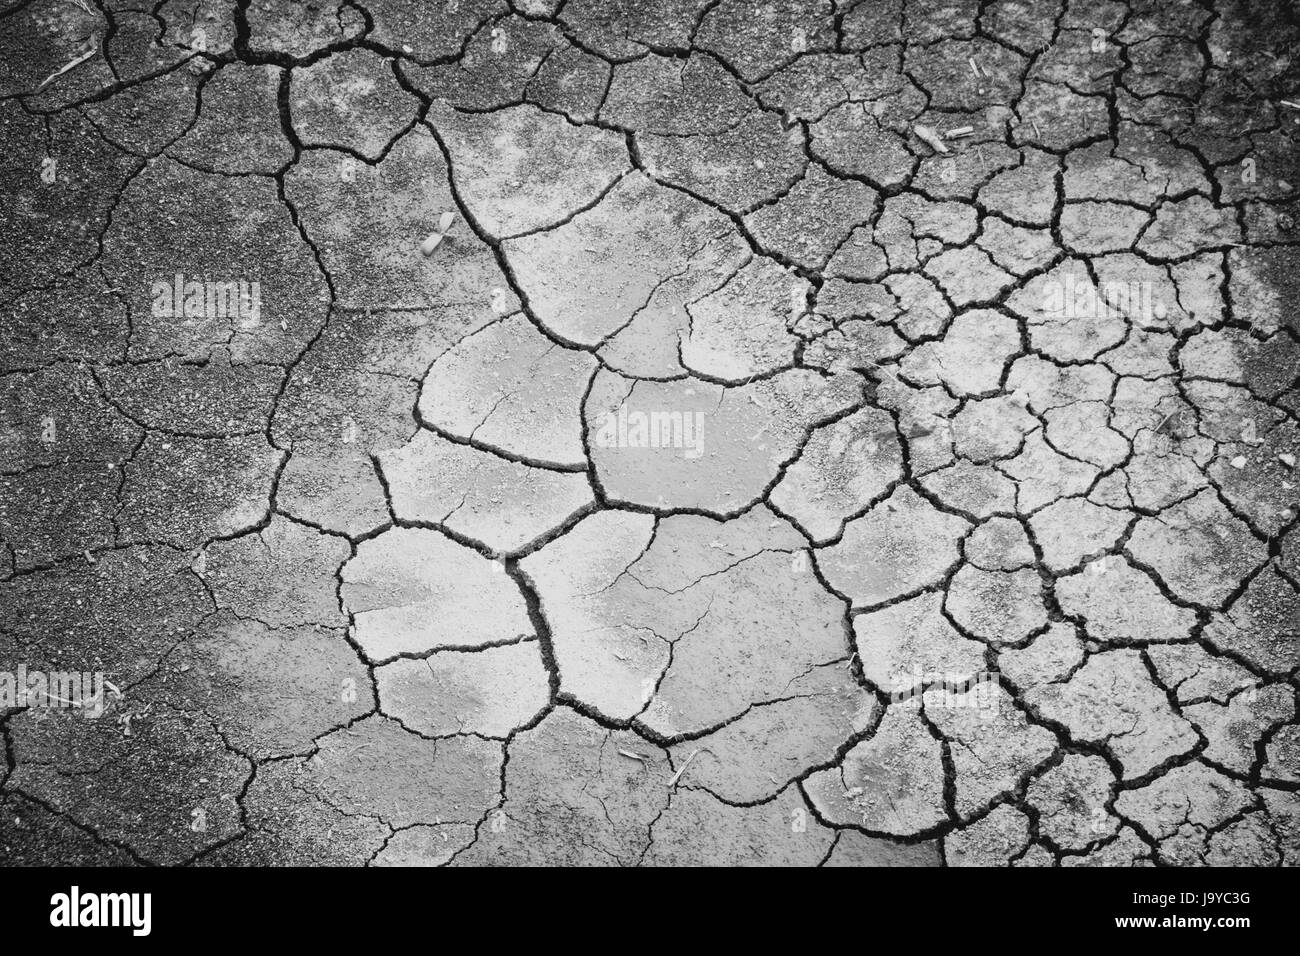 Land with dry and cracked ground,cracks in the ground background Stock Photo